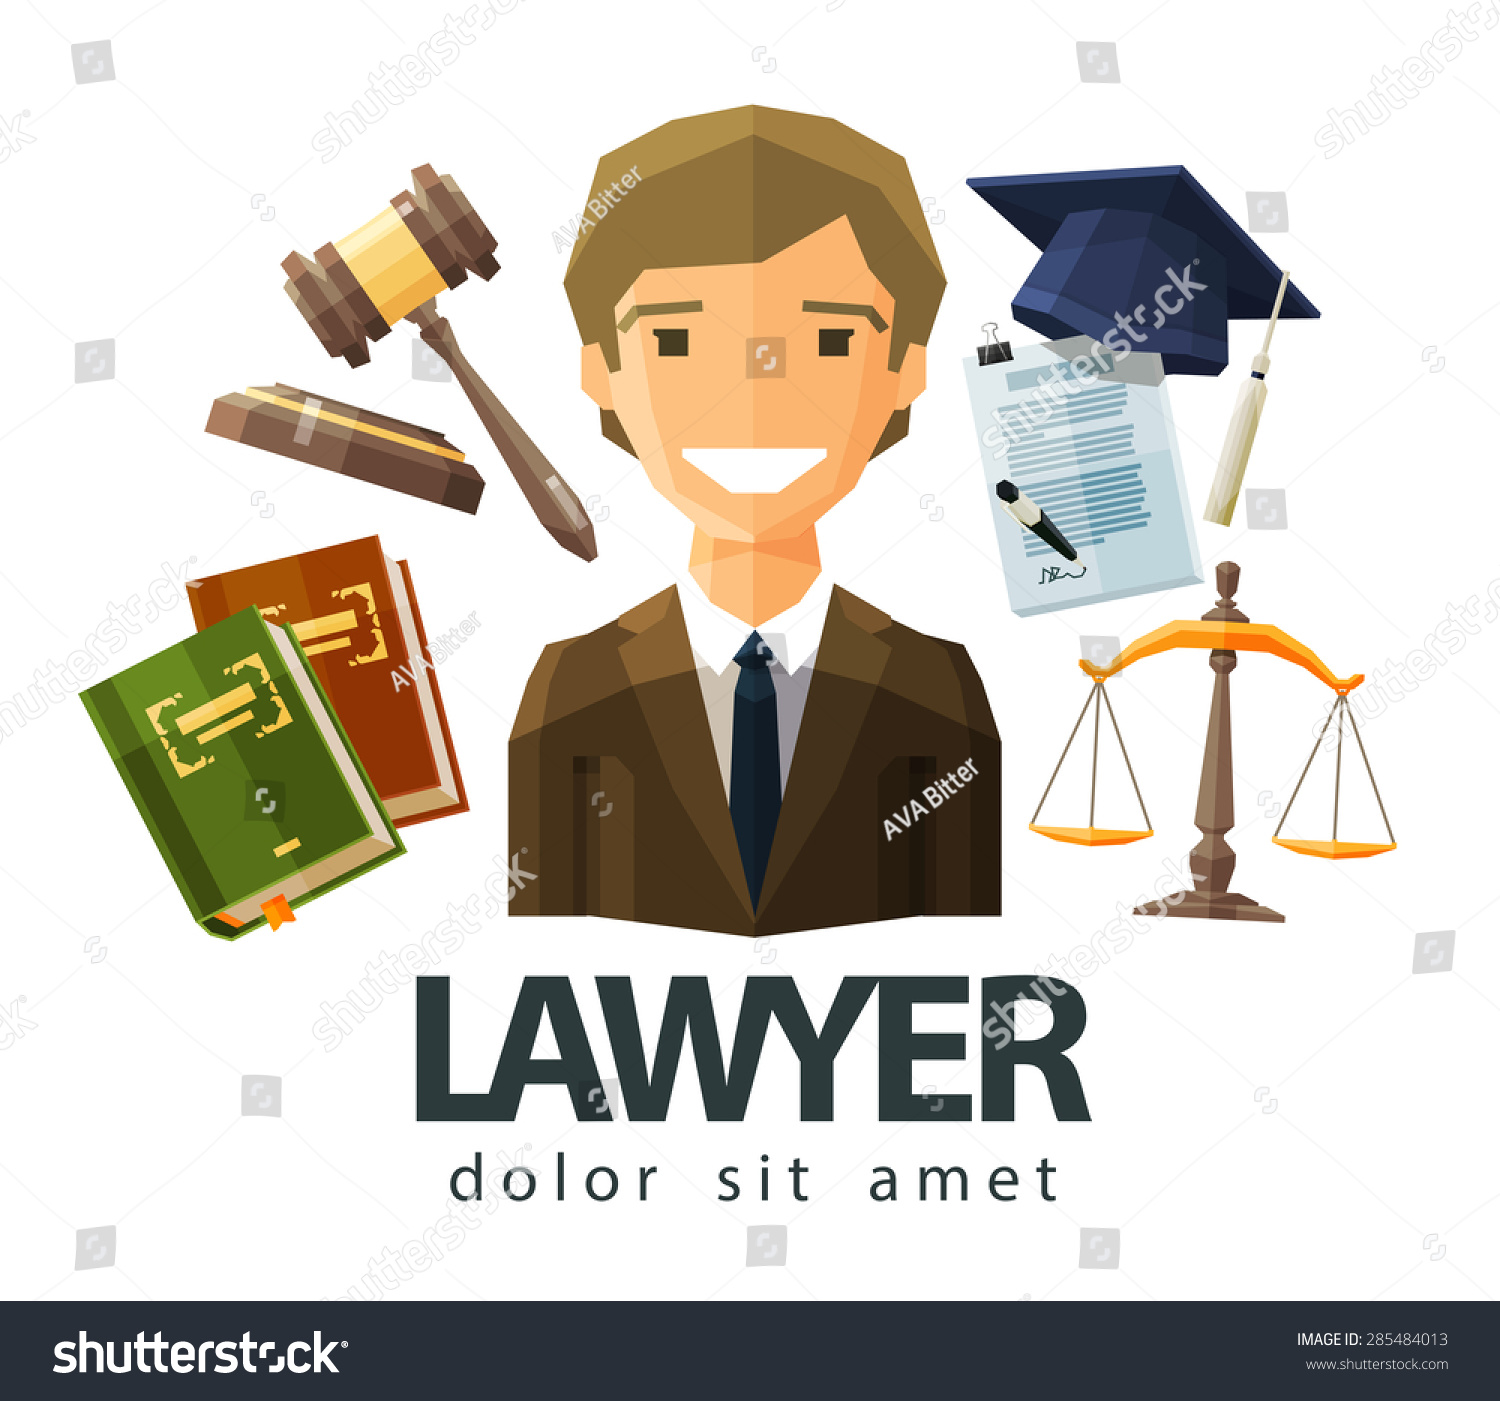 free clipart images lawyers - photo #49